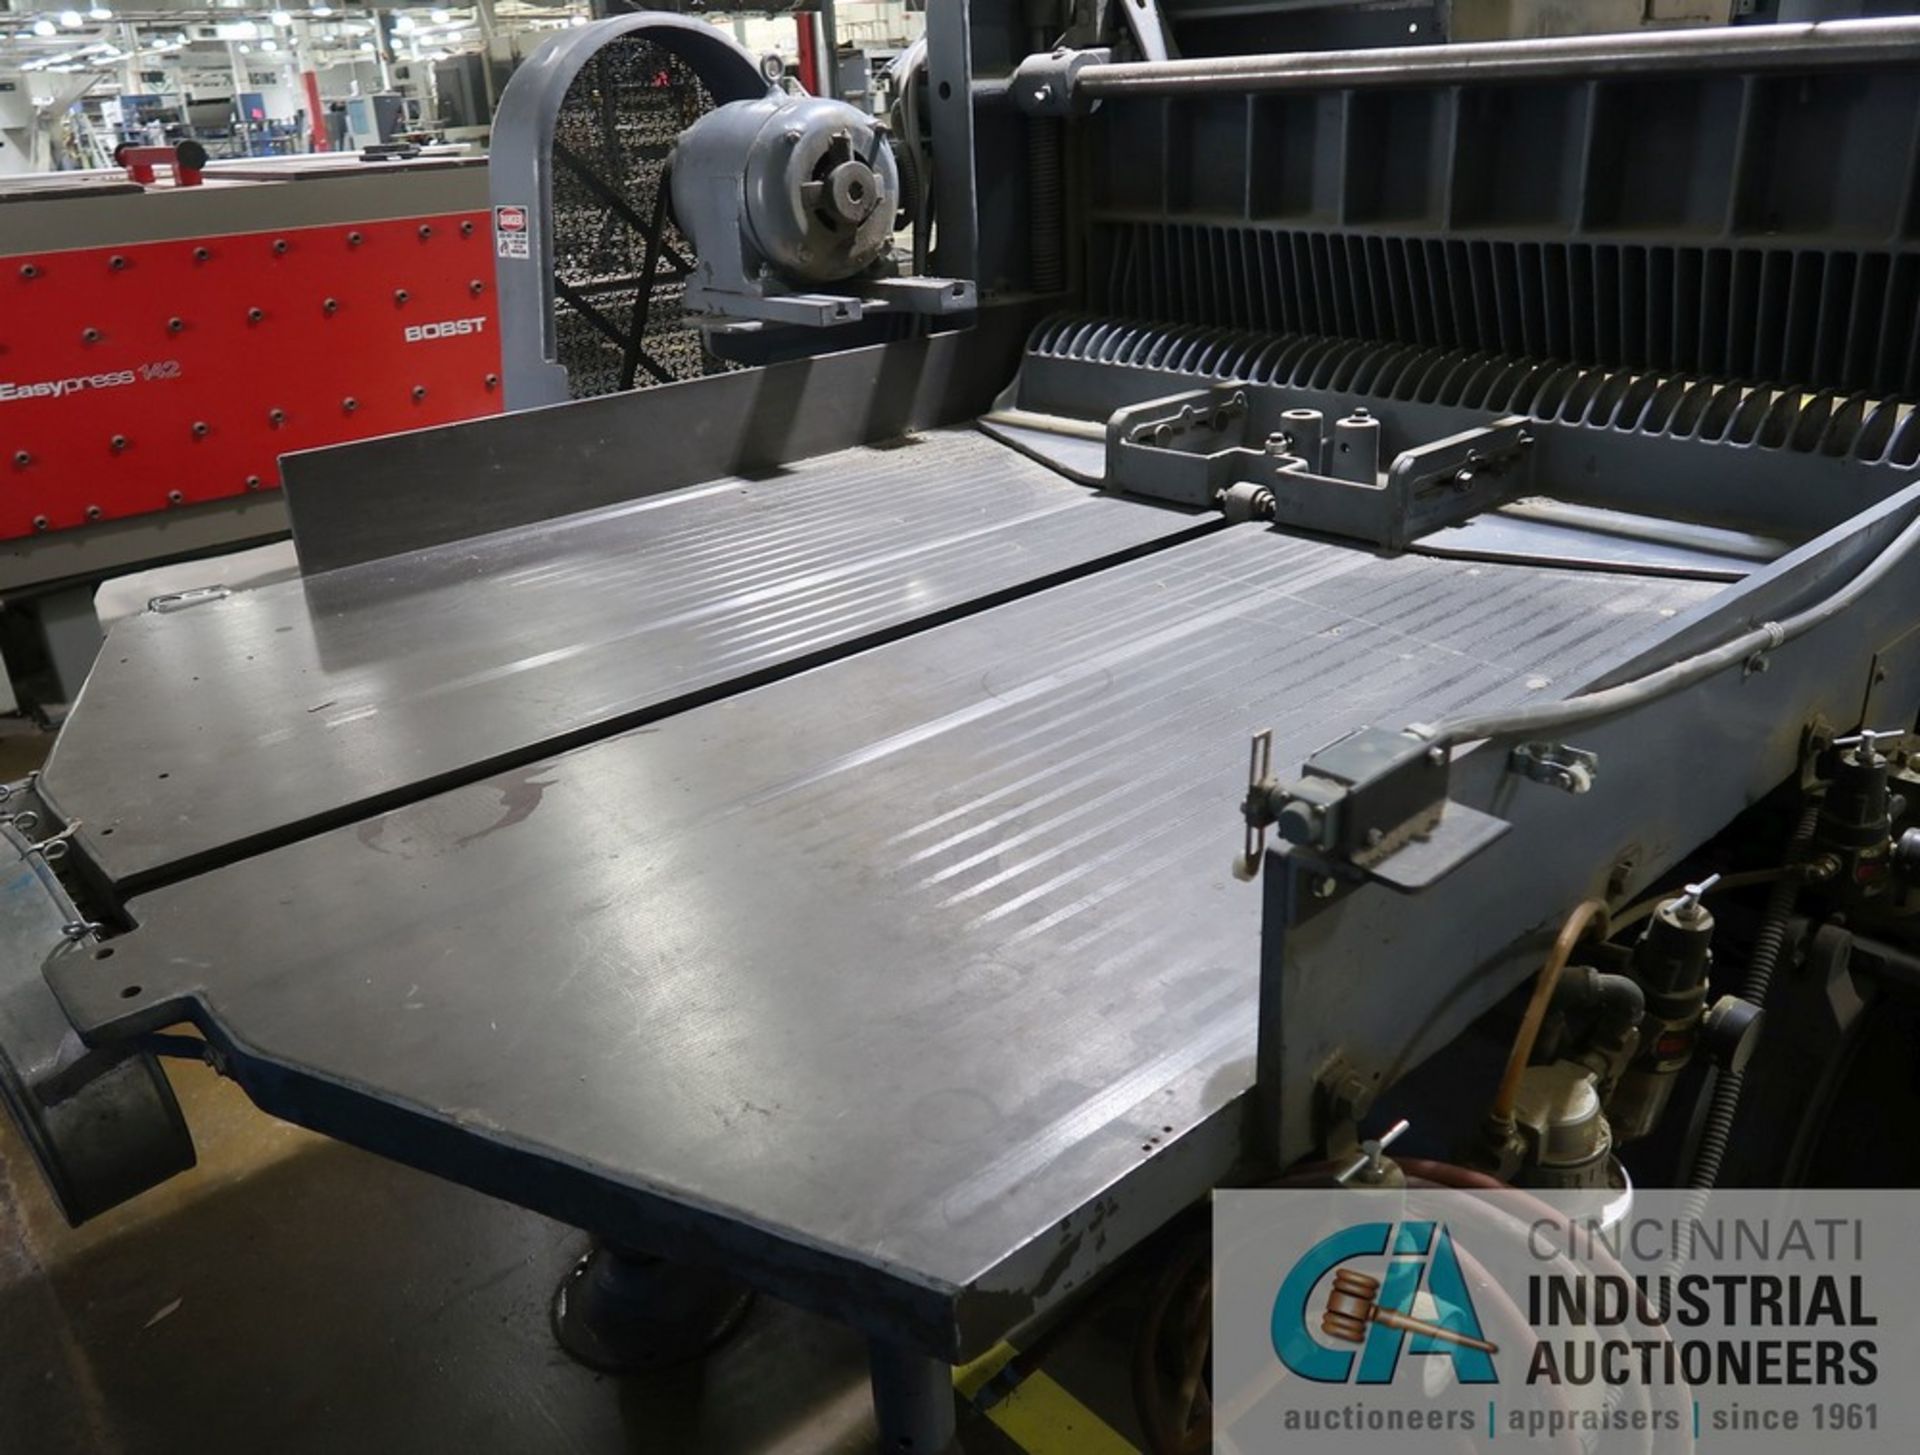 65" SEYBOLD MODEL CFF-P PAPER CUTTER; S/N CFF-524, WITH 92) SAFETY CLOSURES RAKE BACKSTOP, FOOT - Image 4 of 16